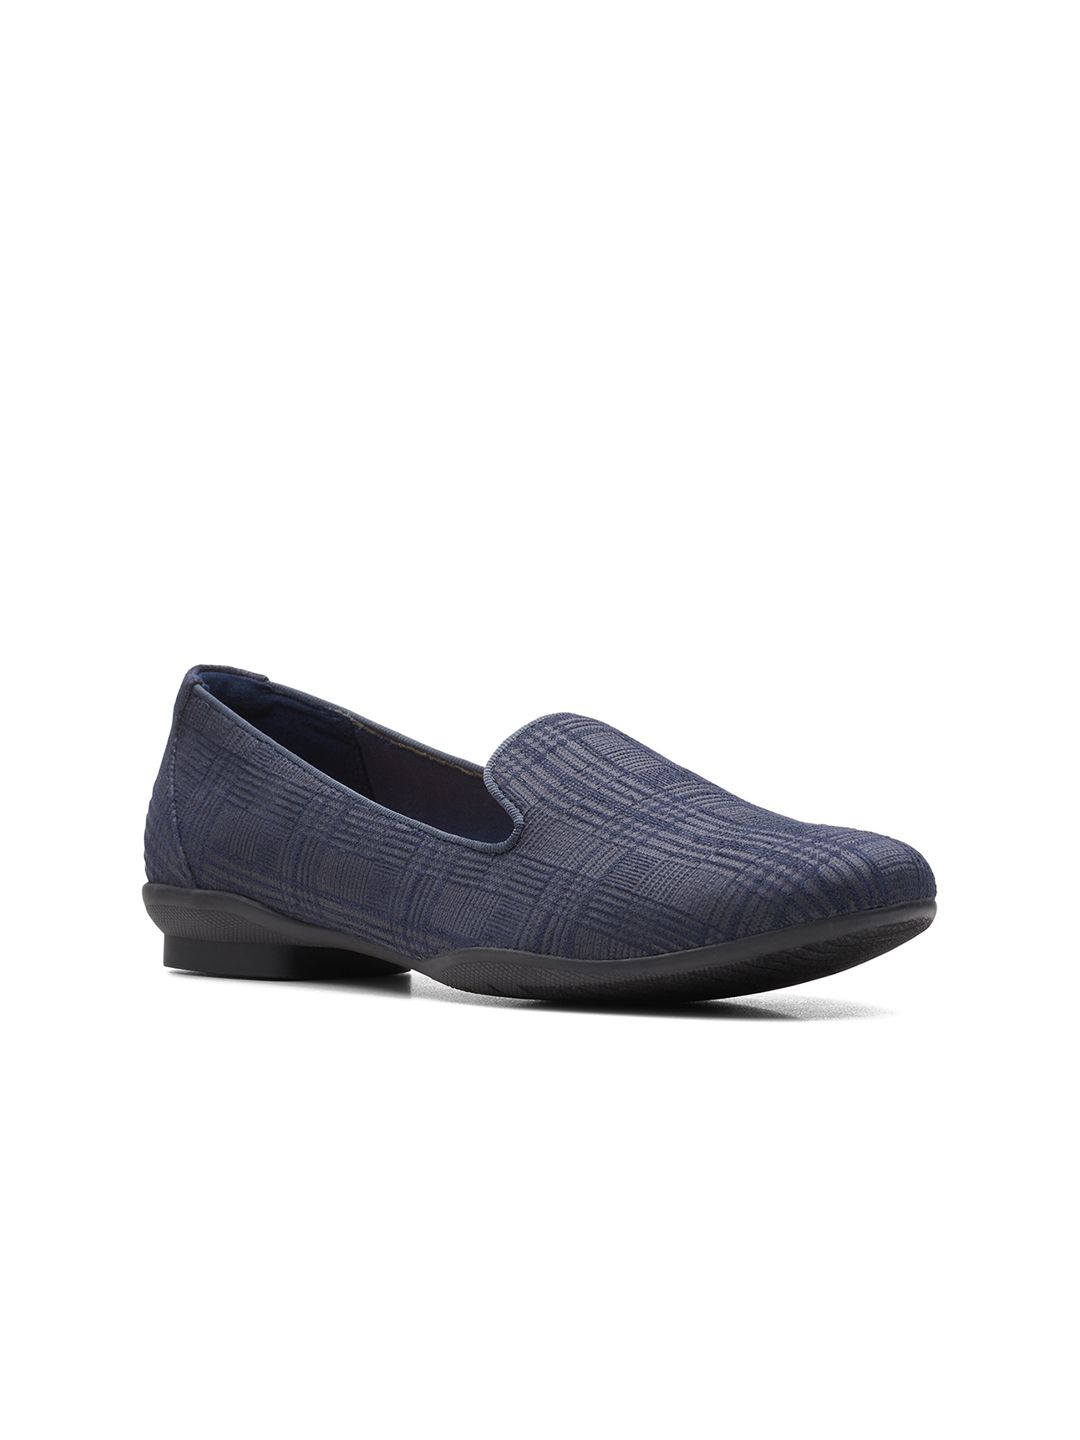 Clarks Women Navy Blue Woven Design Loafers Price in India